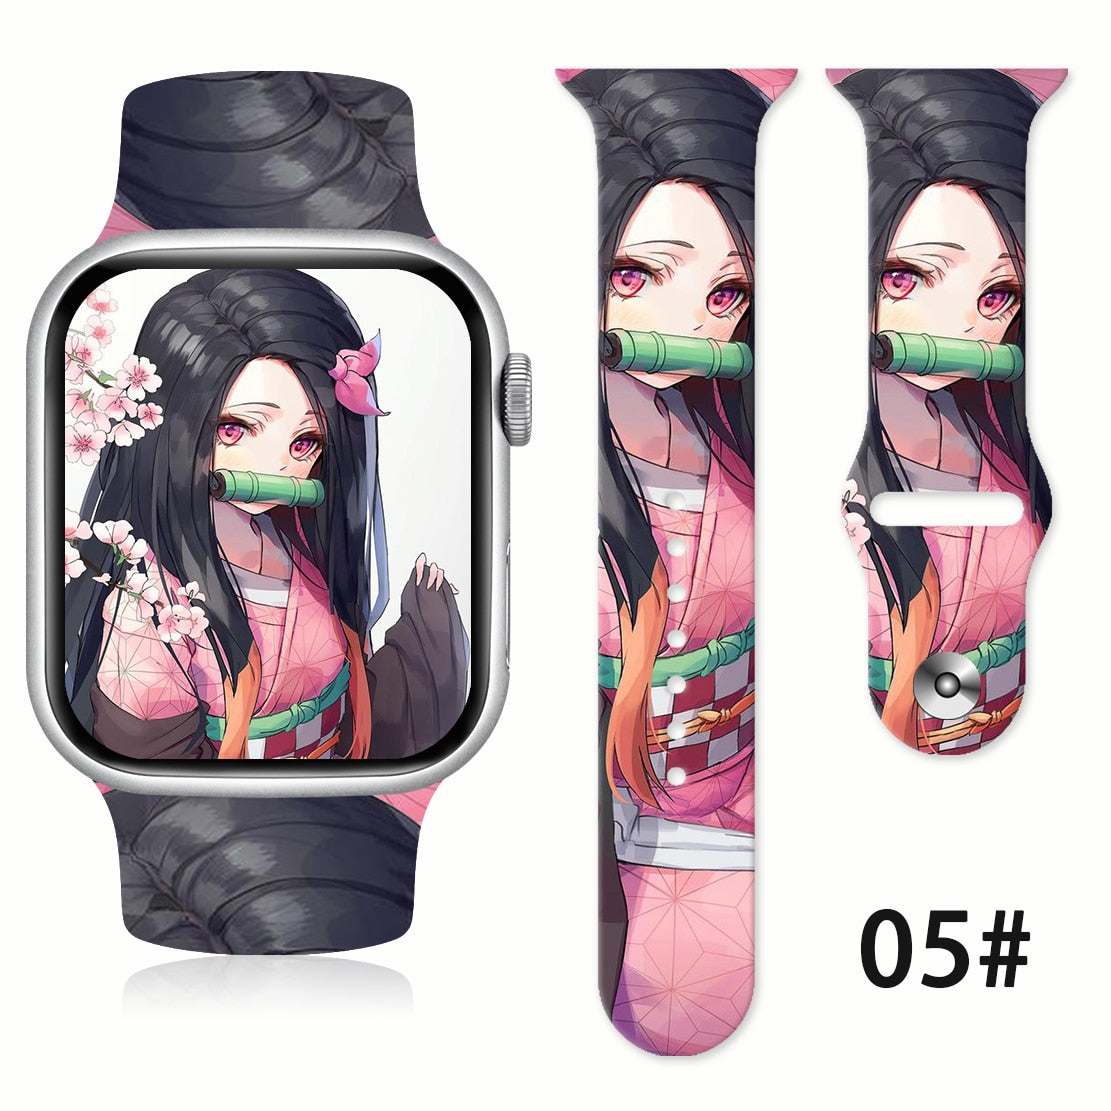 Demon Slayer Strap Band for Apple Watch 05